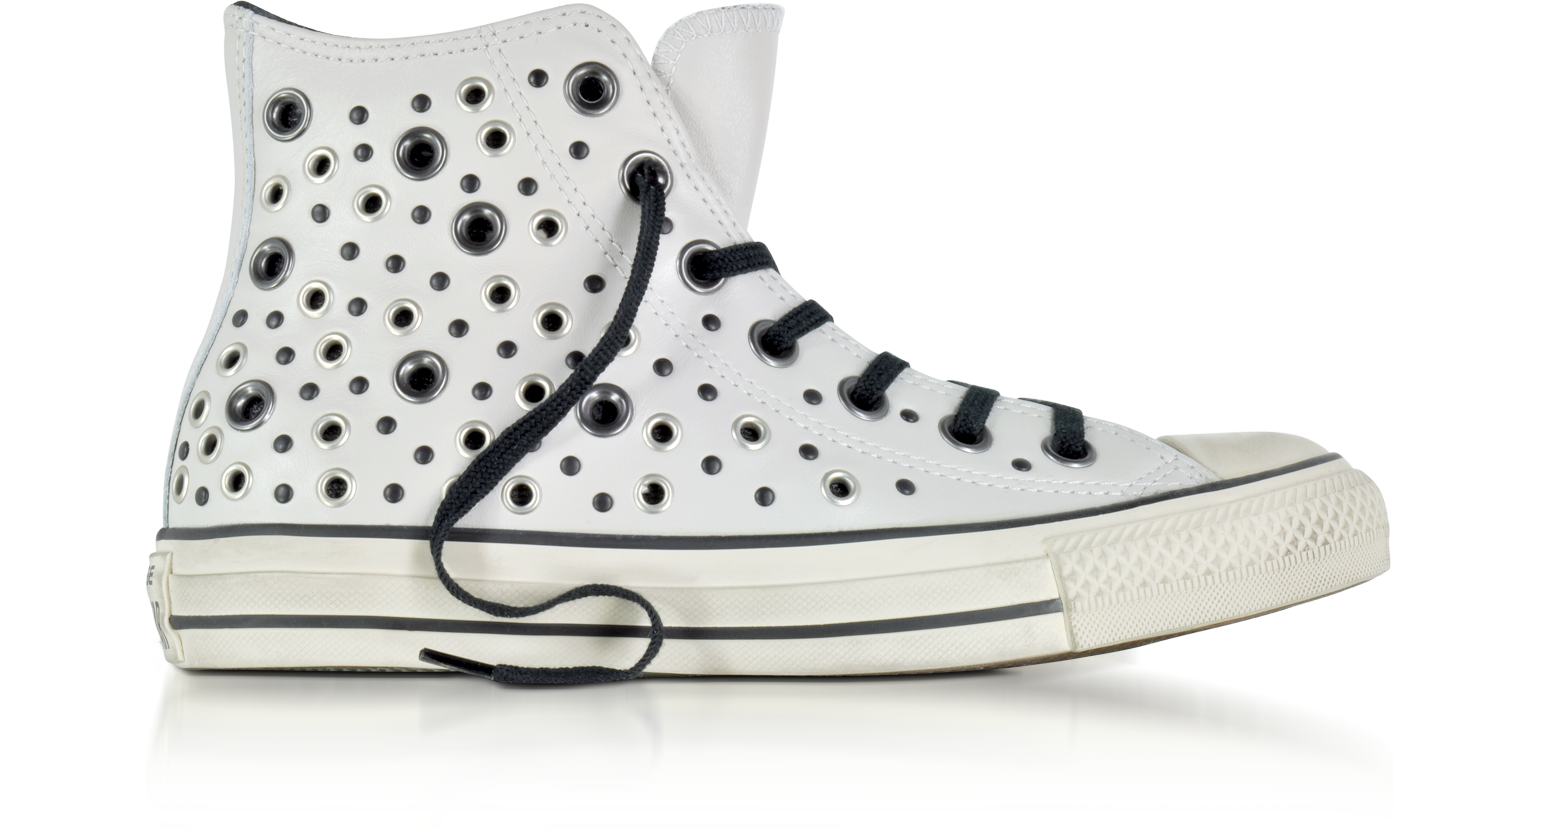 converse all star borchie limited edition